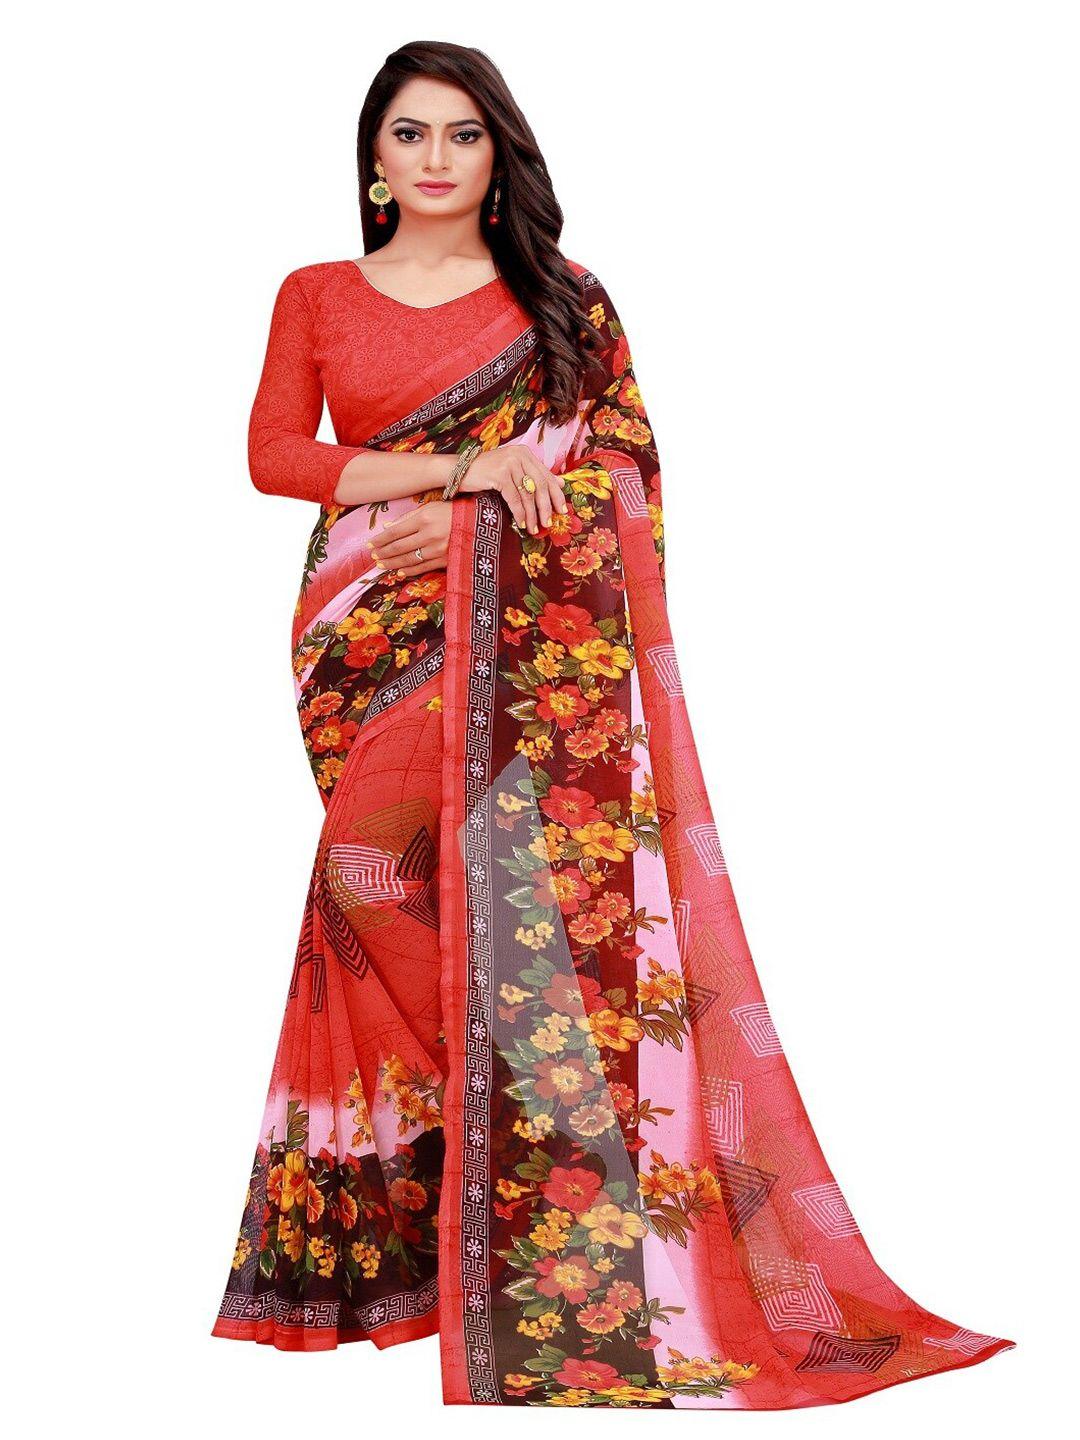 florence peach-coloured & yellow floral pure georgette saree